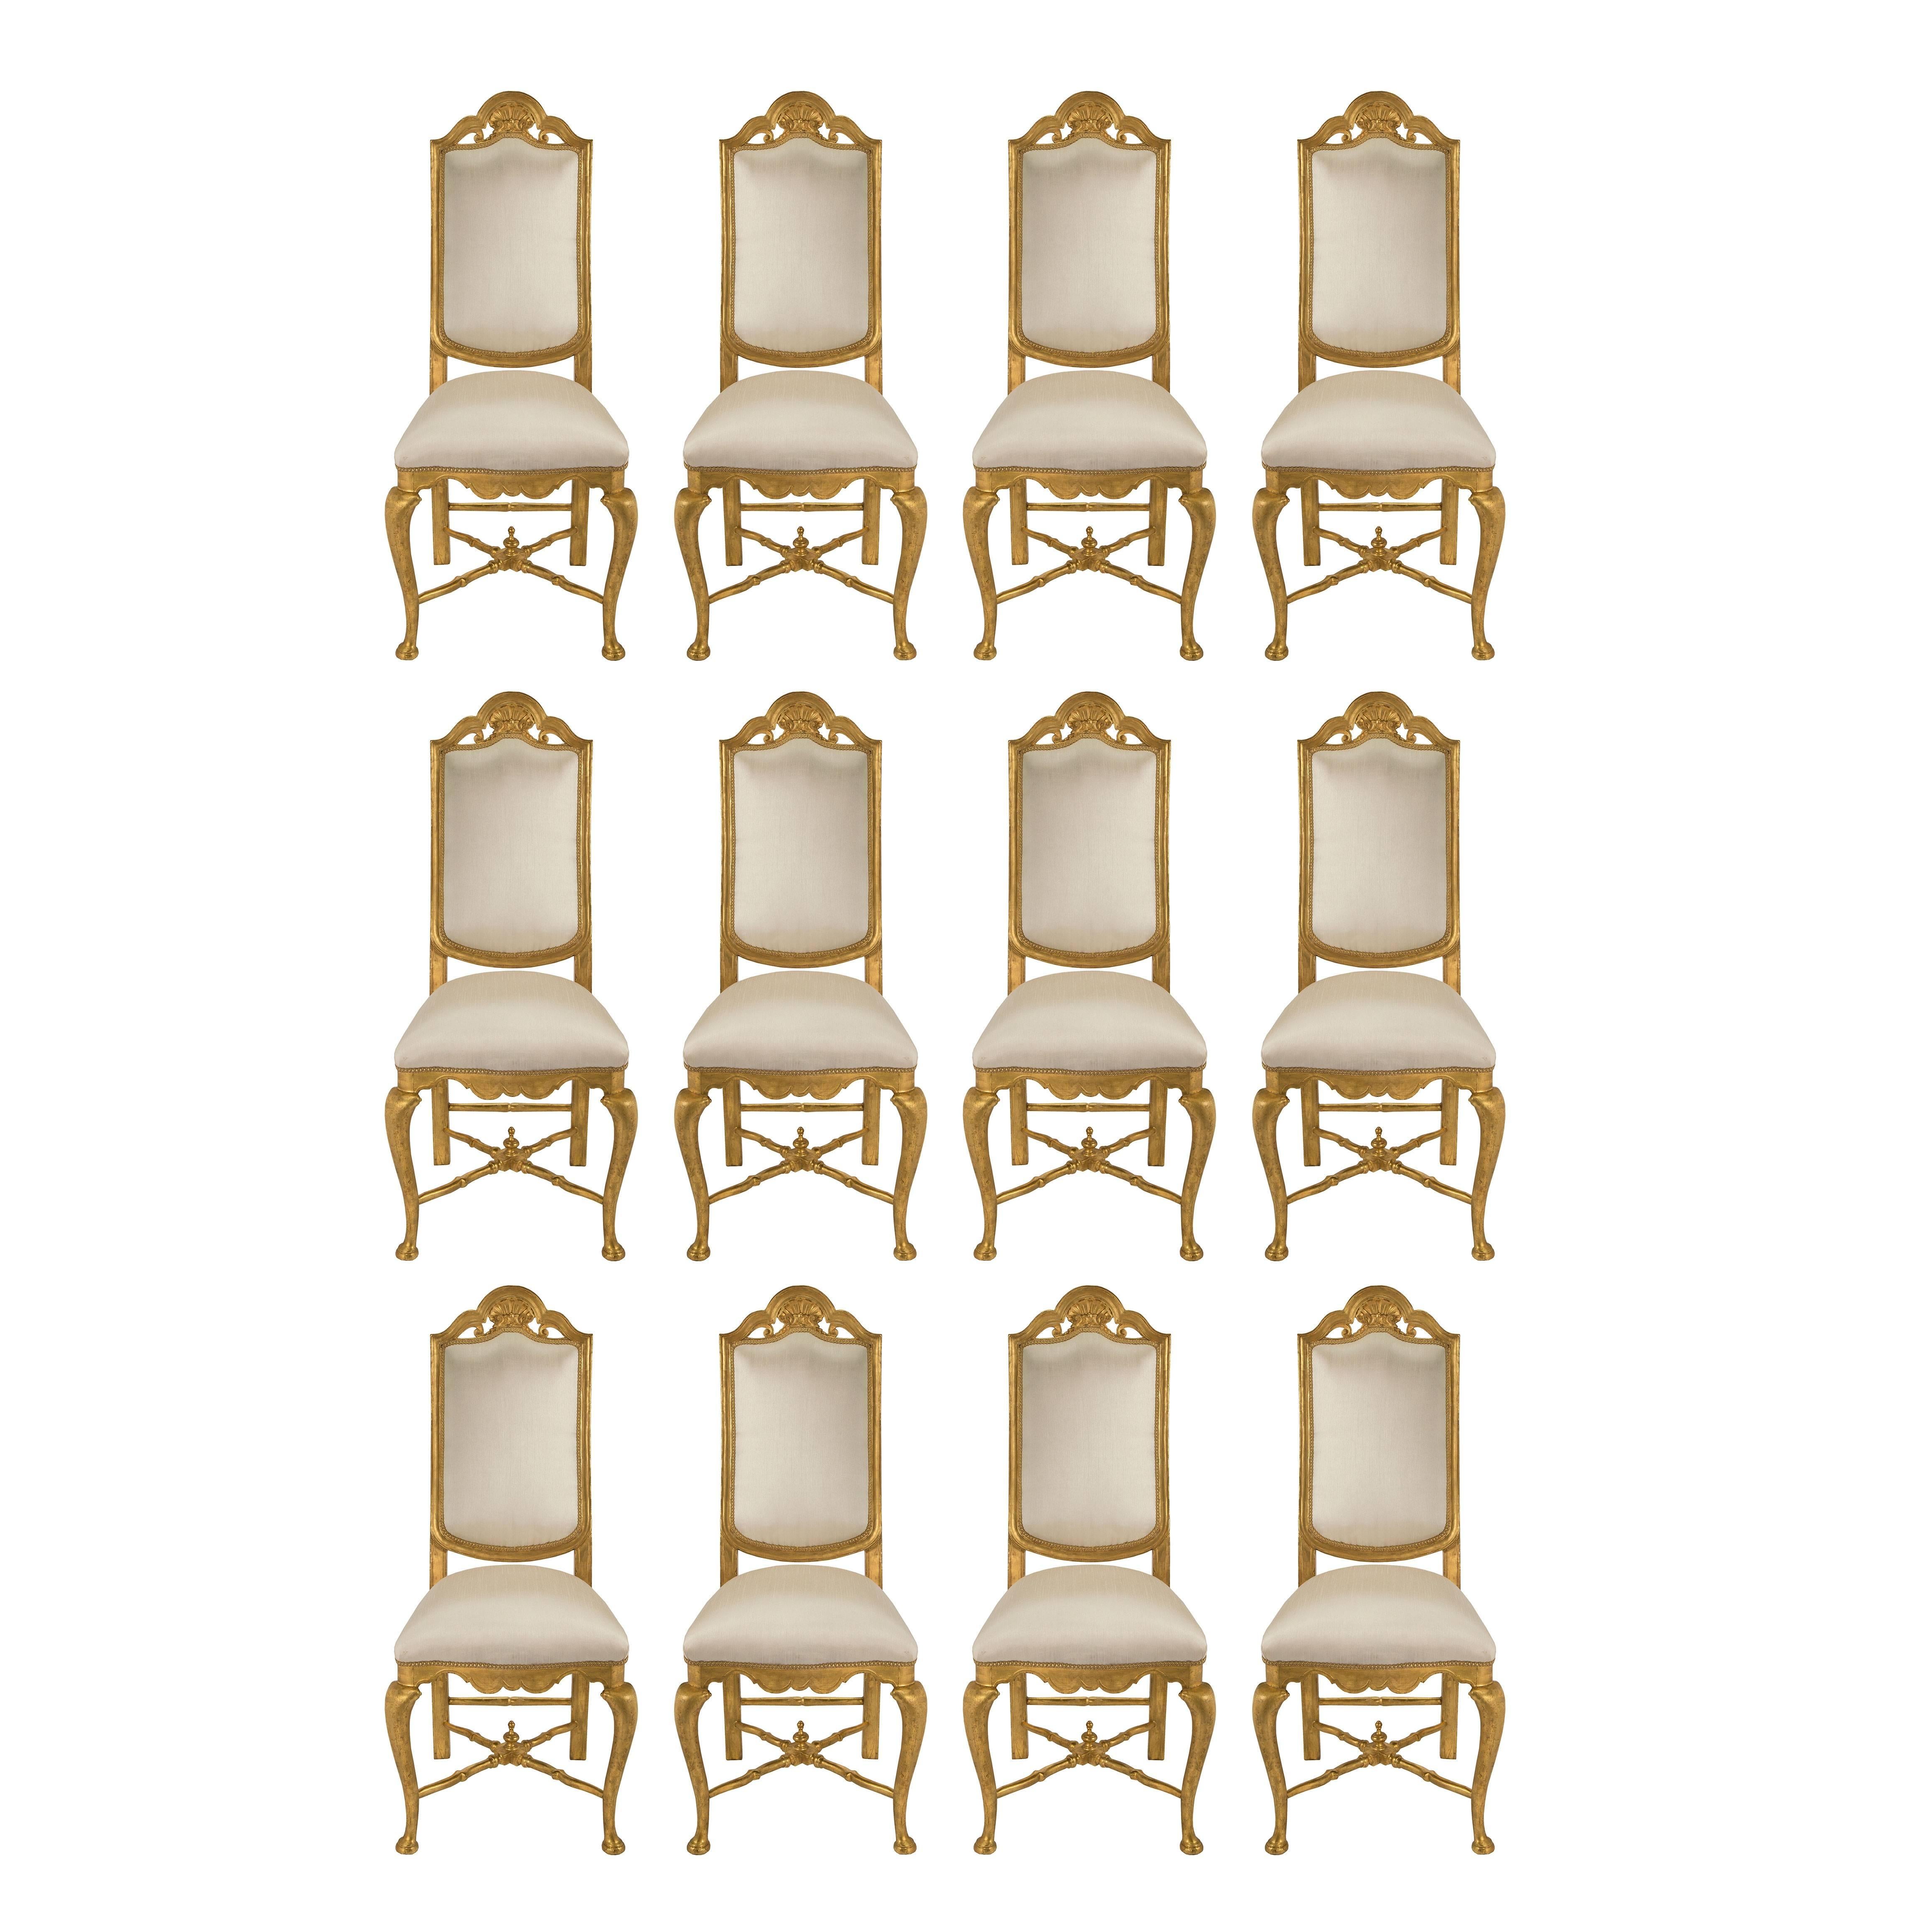 Complete Set of 12 19th Century Louis XV Style Giltwood Dining Chairs